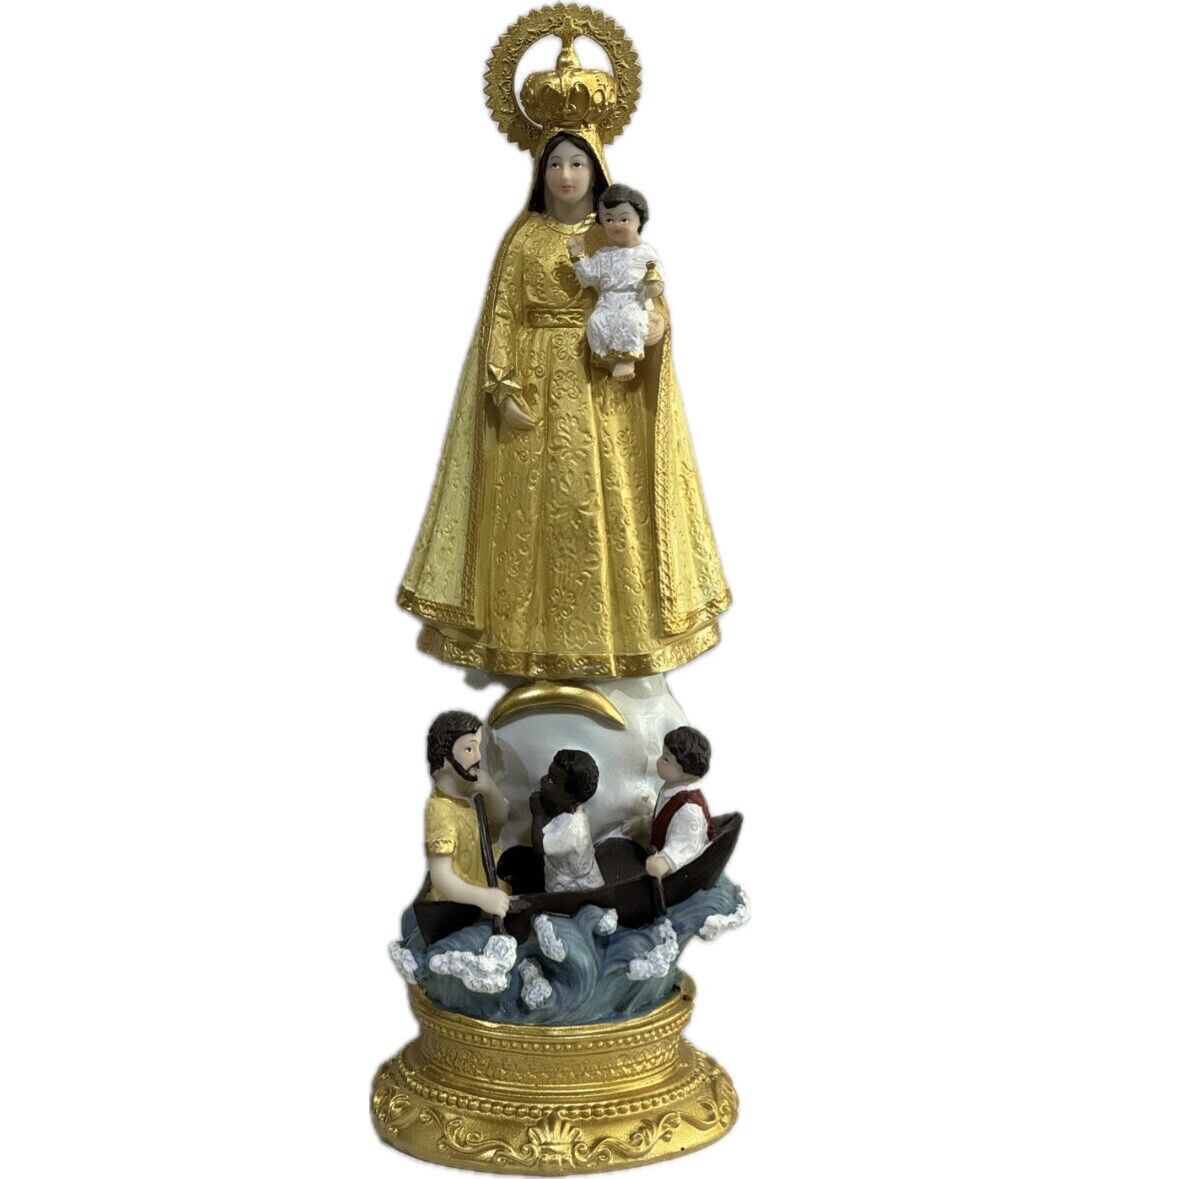 12” Inch Virgen Caridad del Cobre Imagen Our Lady of Charity Statue Figure Gift